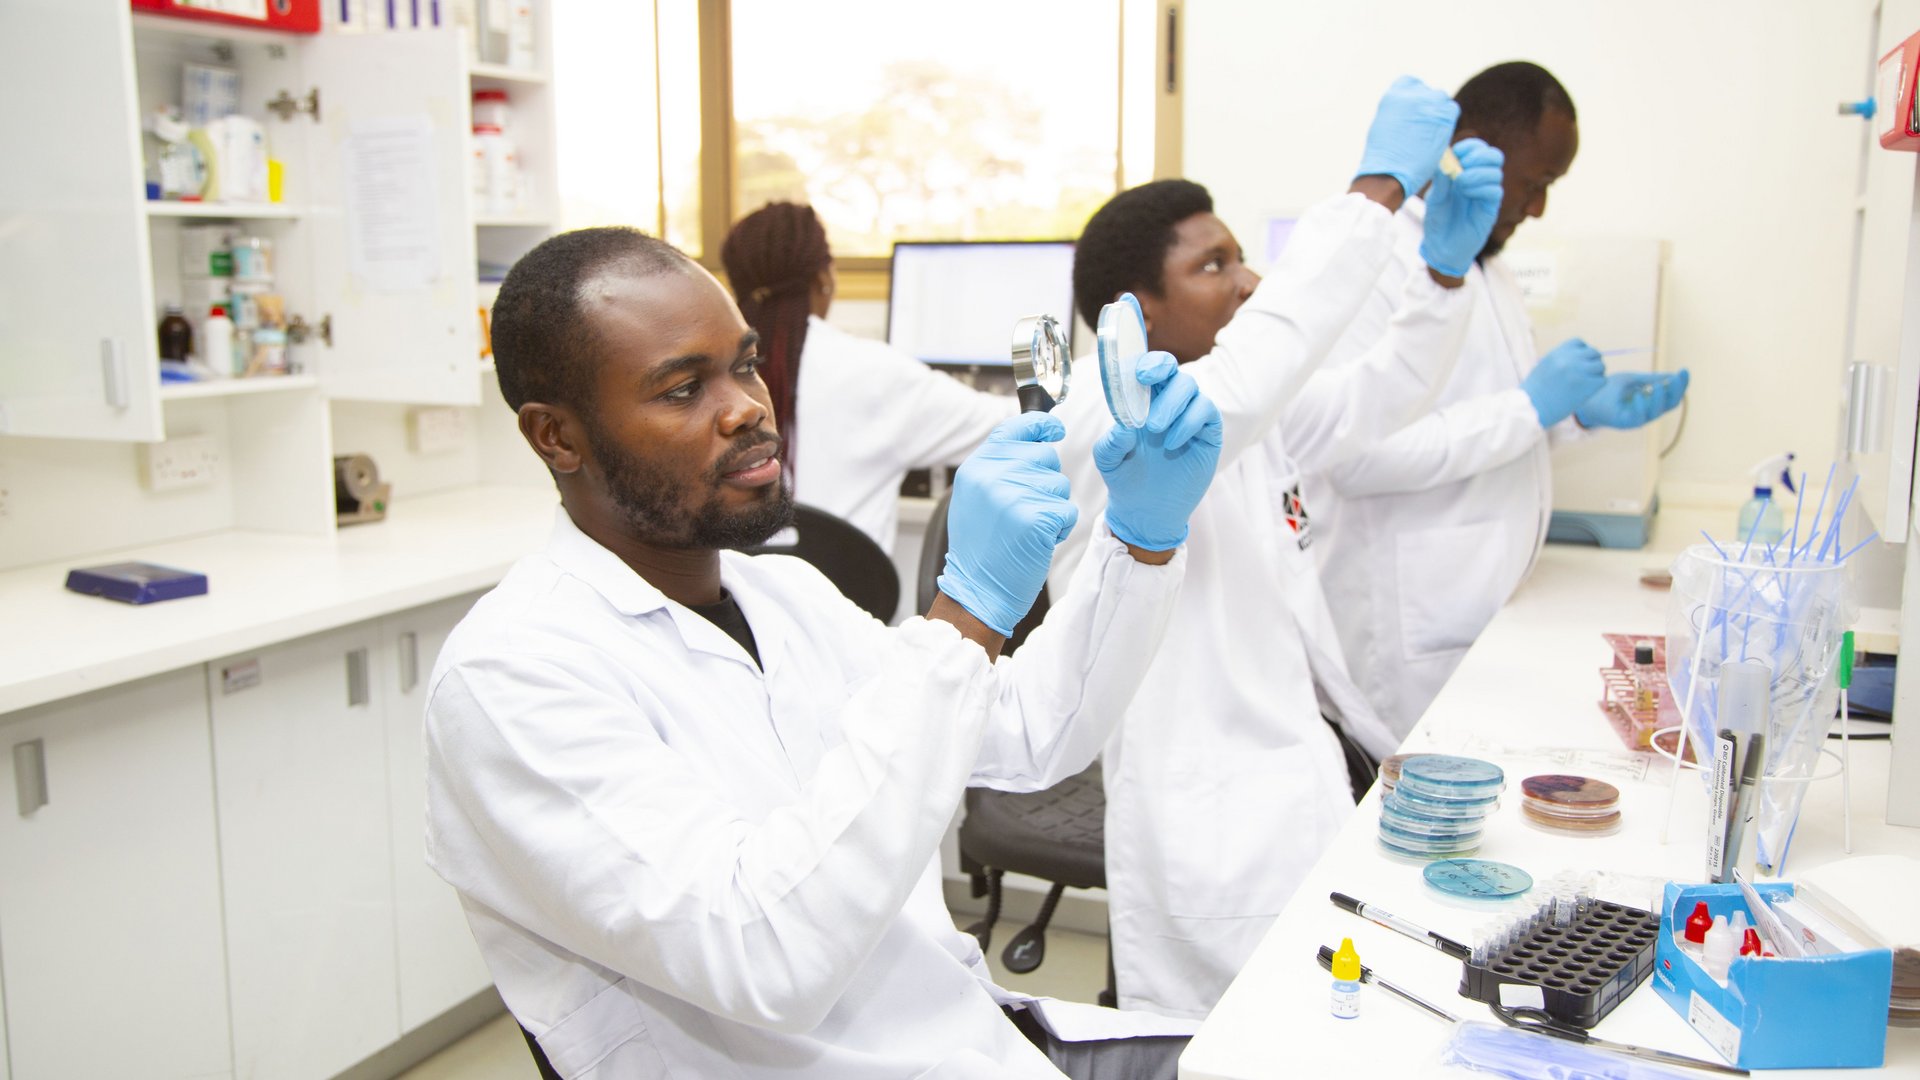 The picture shows three African researchers and one African woman researcher in white coats and light blue gloves working in the laboratory.